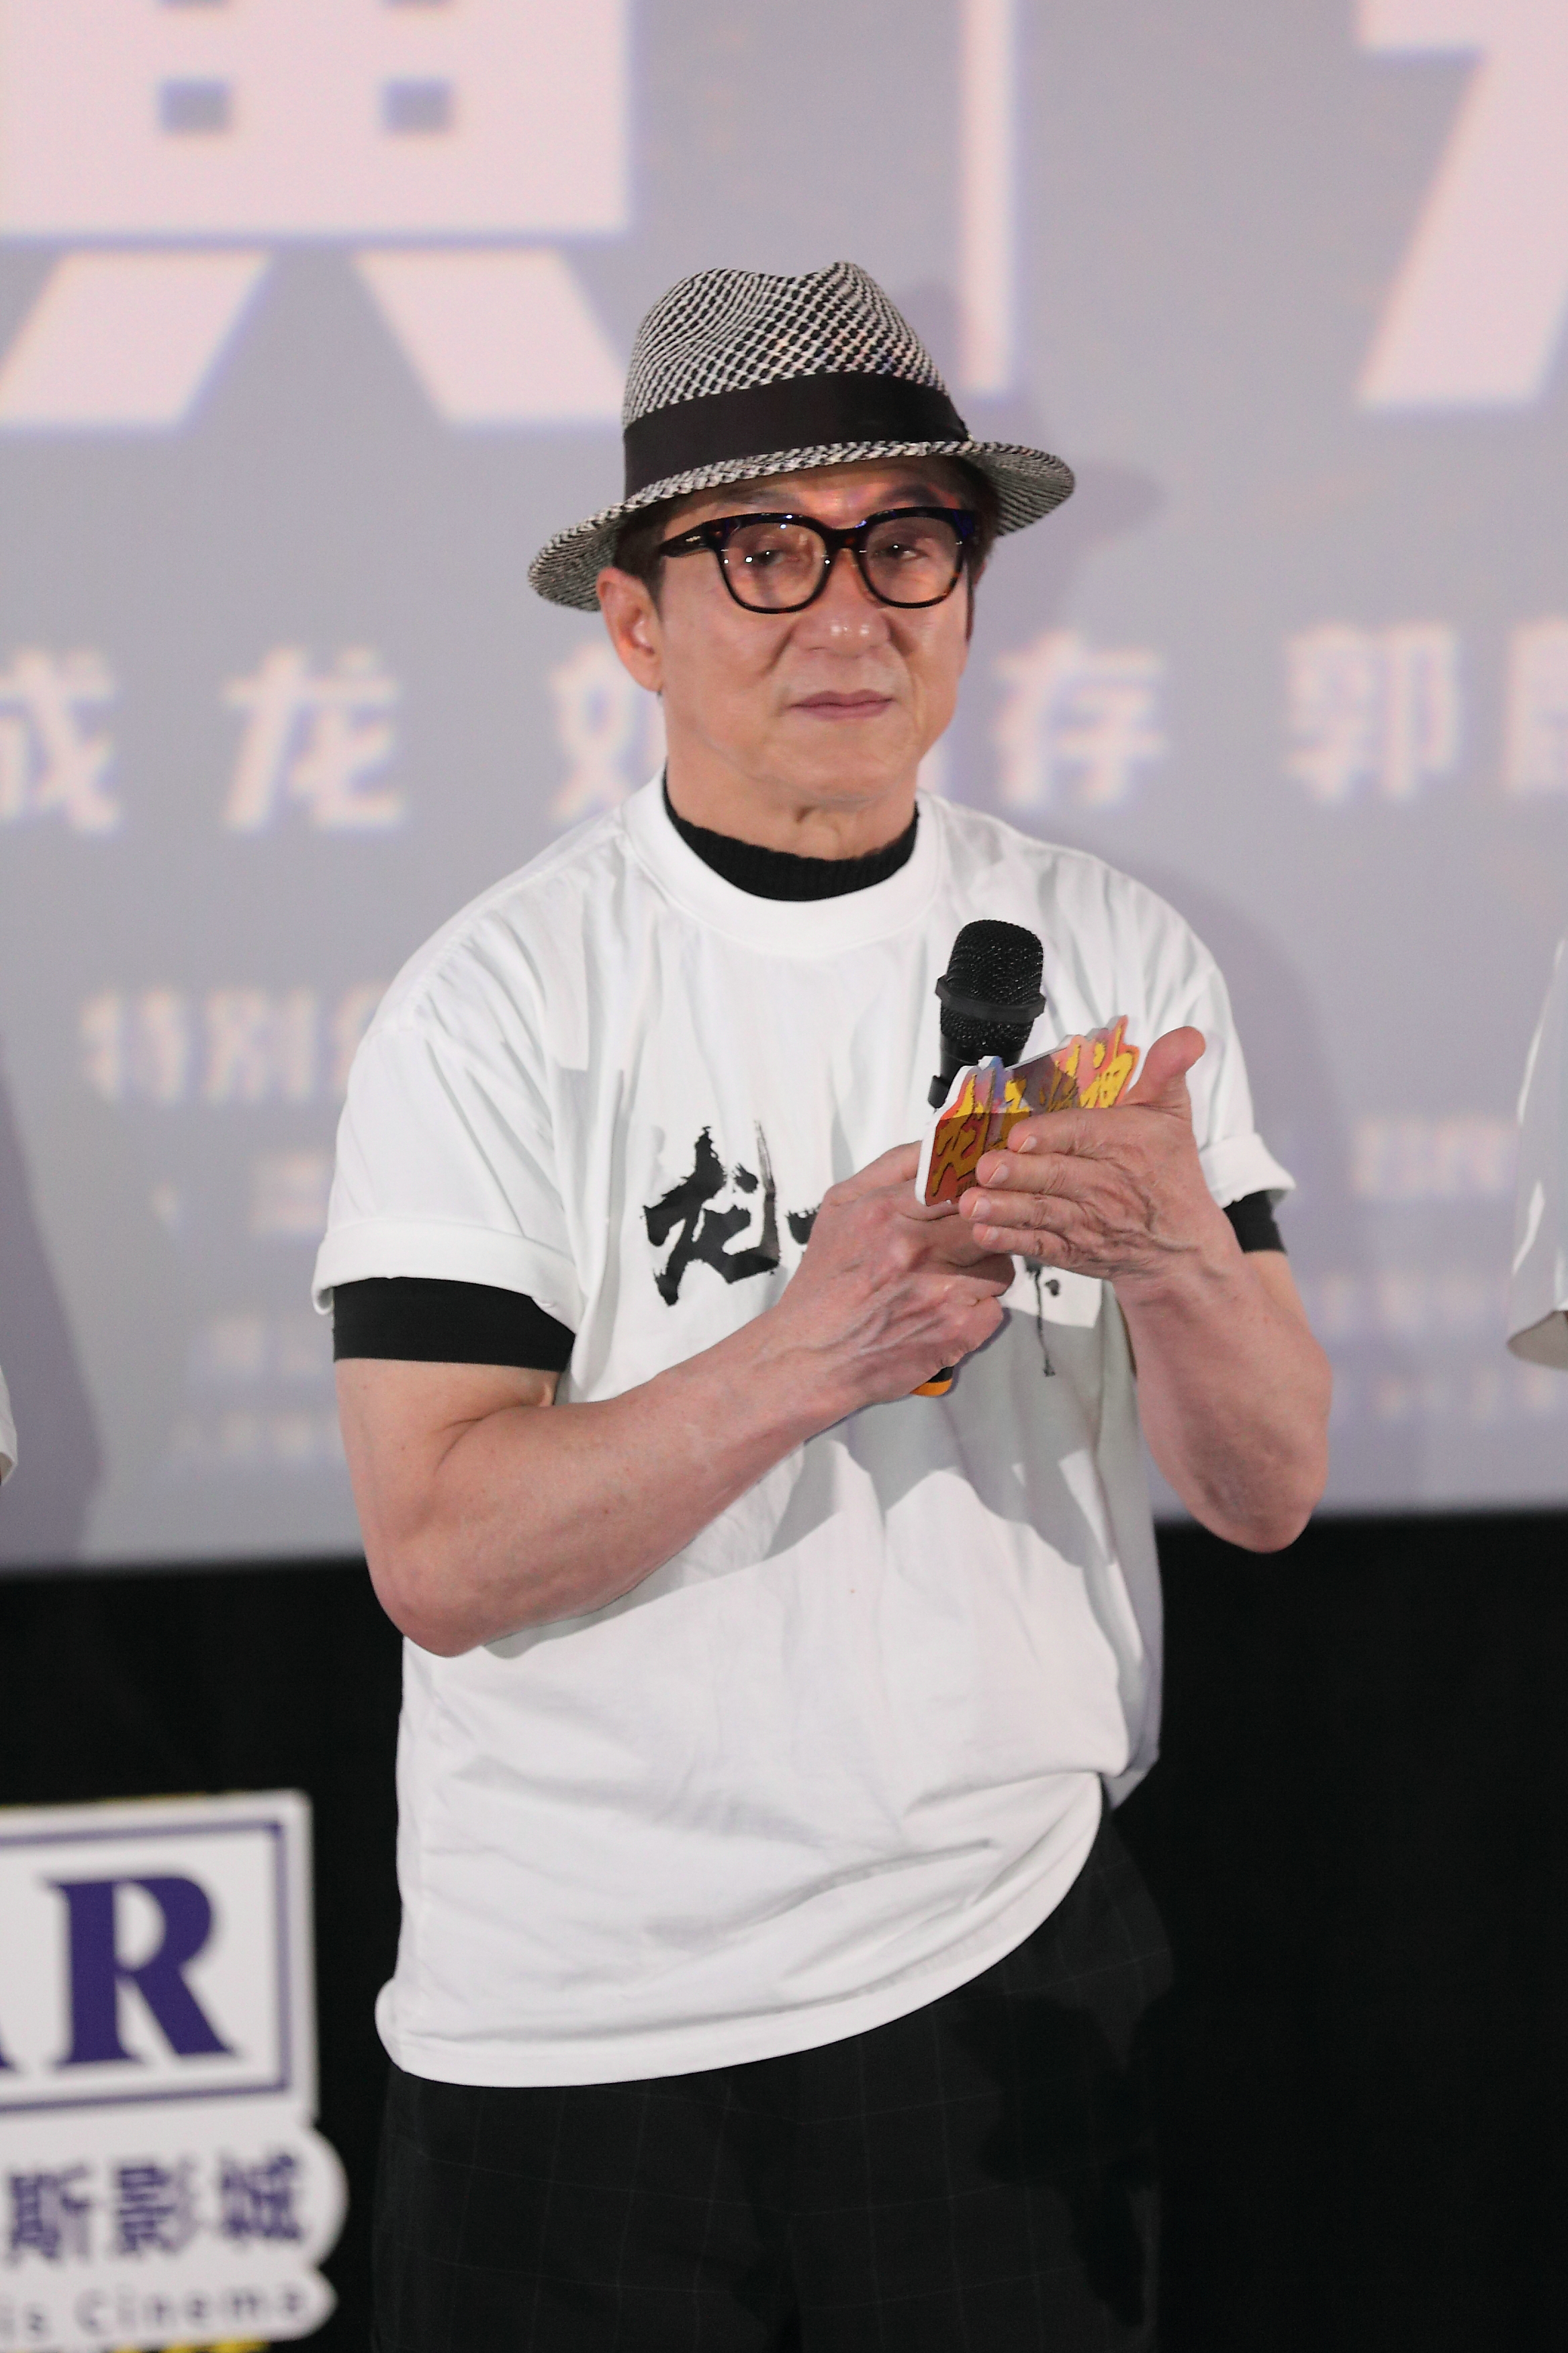 Jackie Chan on April 3, 2023 in Zhengzhou, Henan Province of China | Source: Getty Images